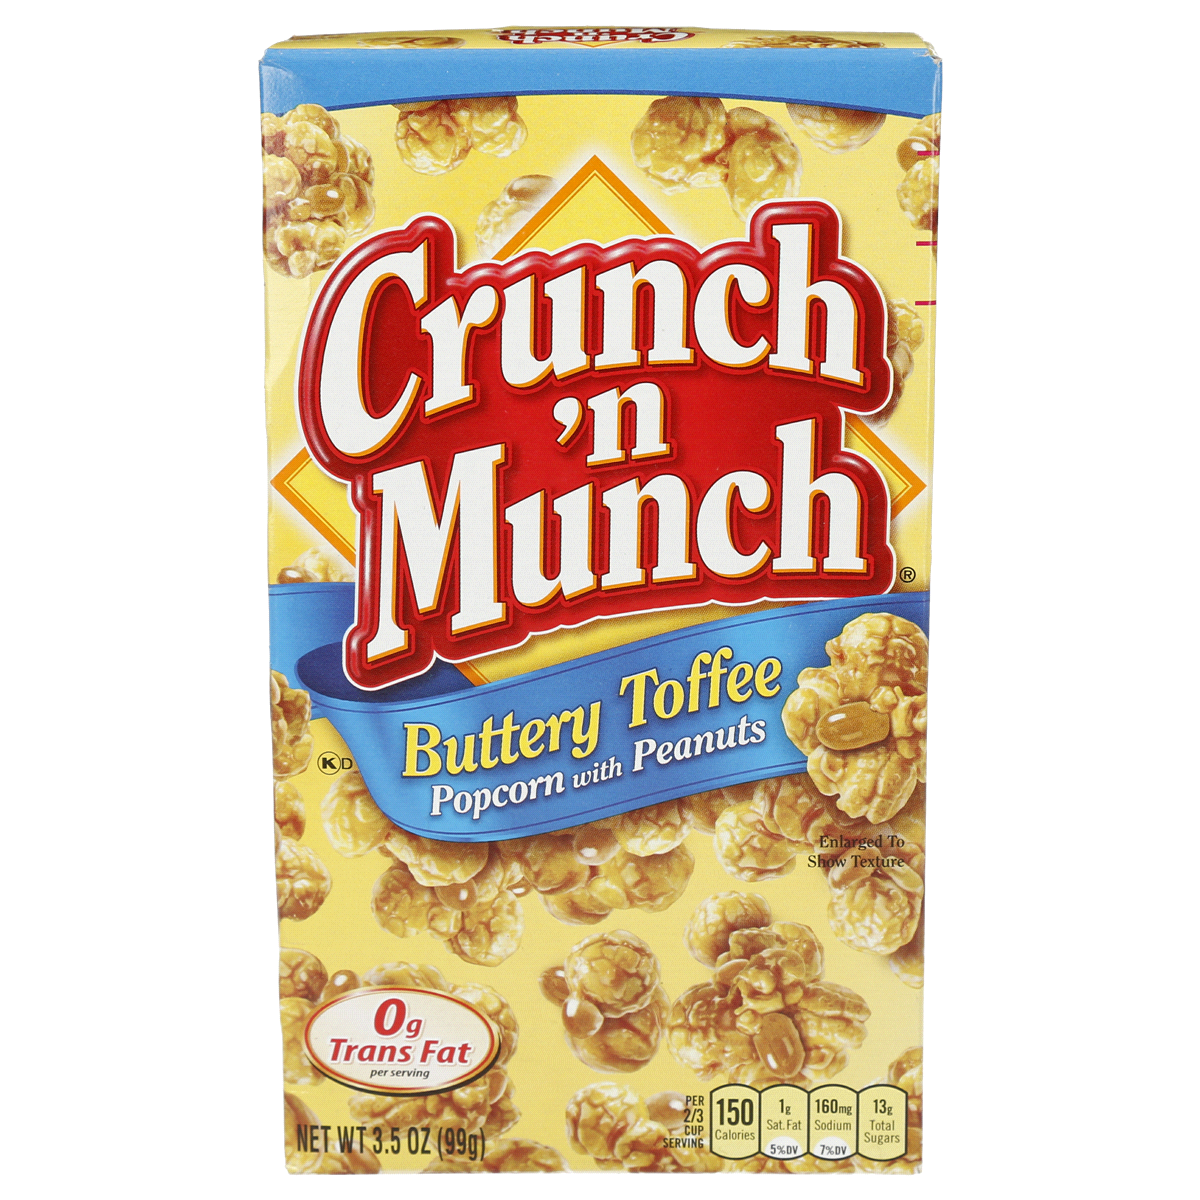 slide 1 of 3, Crunch 'n Munch Buttery Toffee Popcorn with Peanuts, 3.5 oz